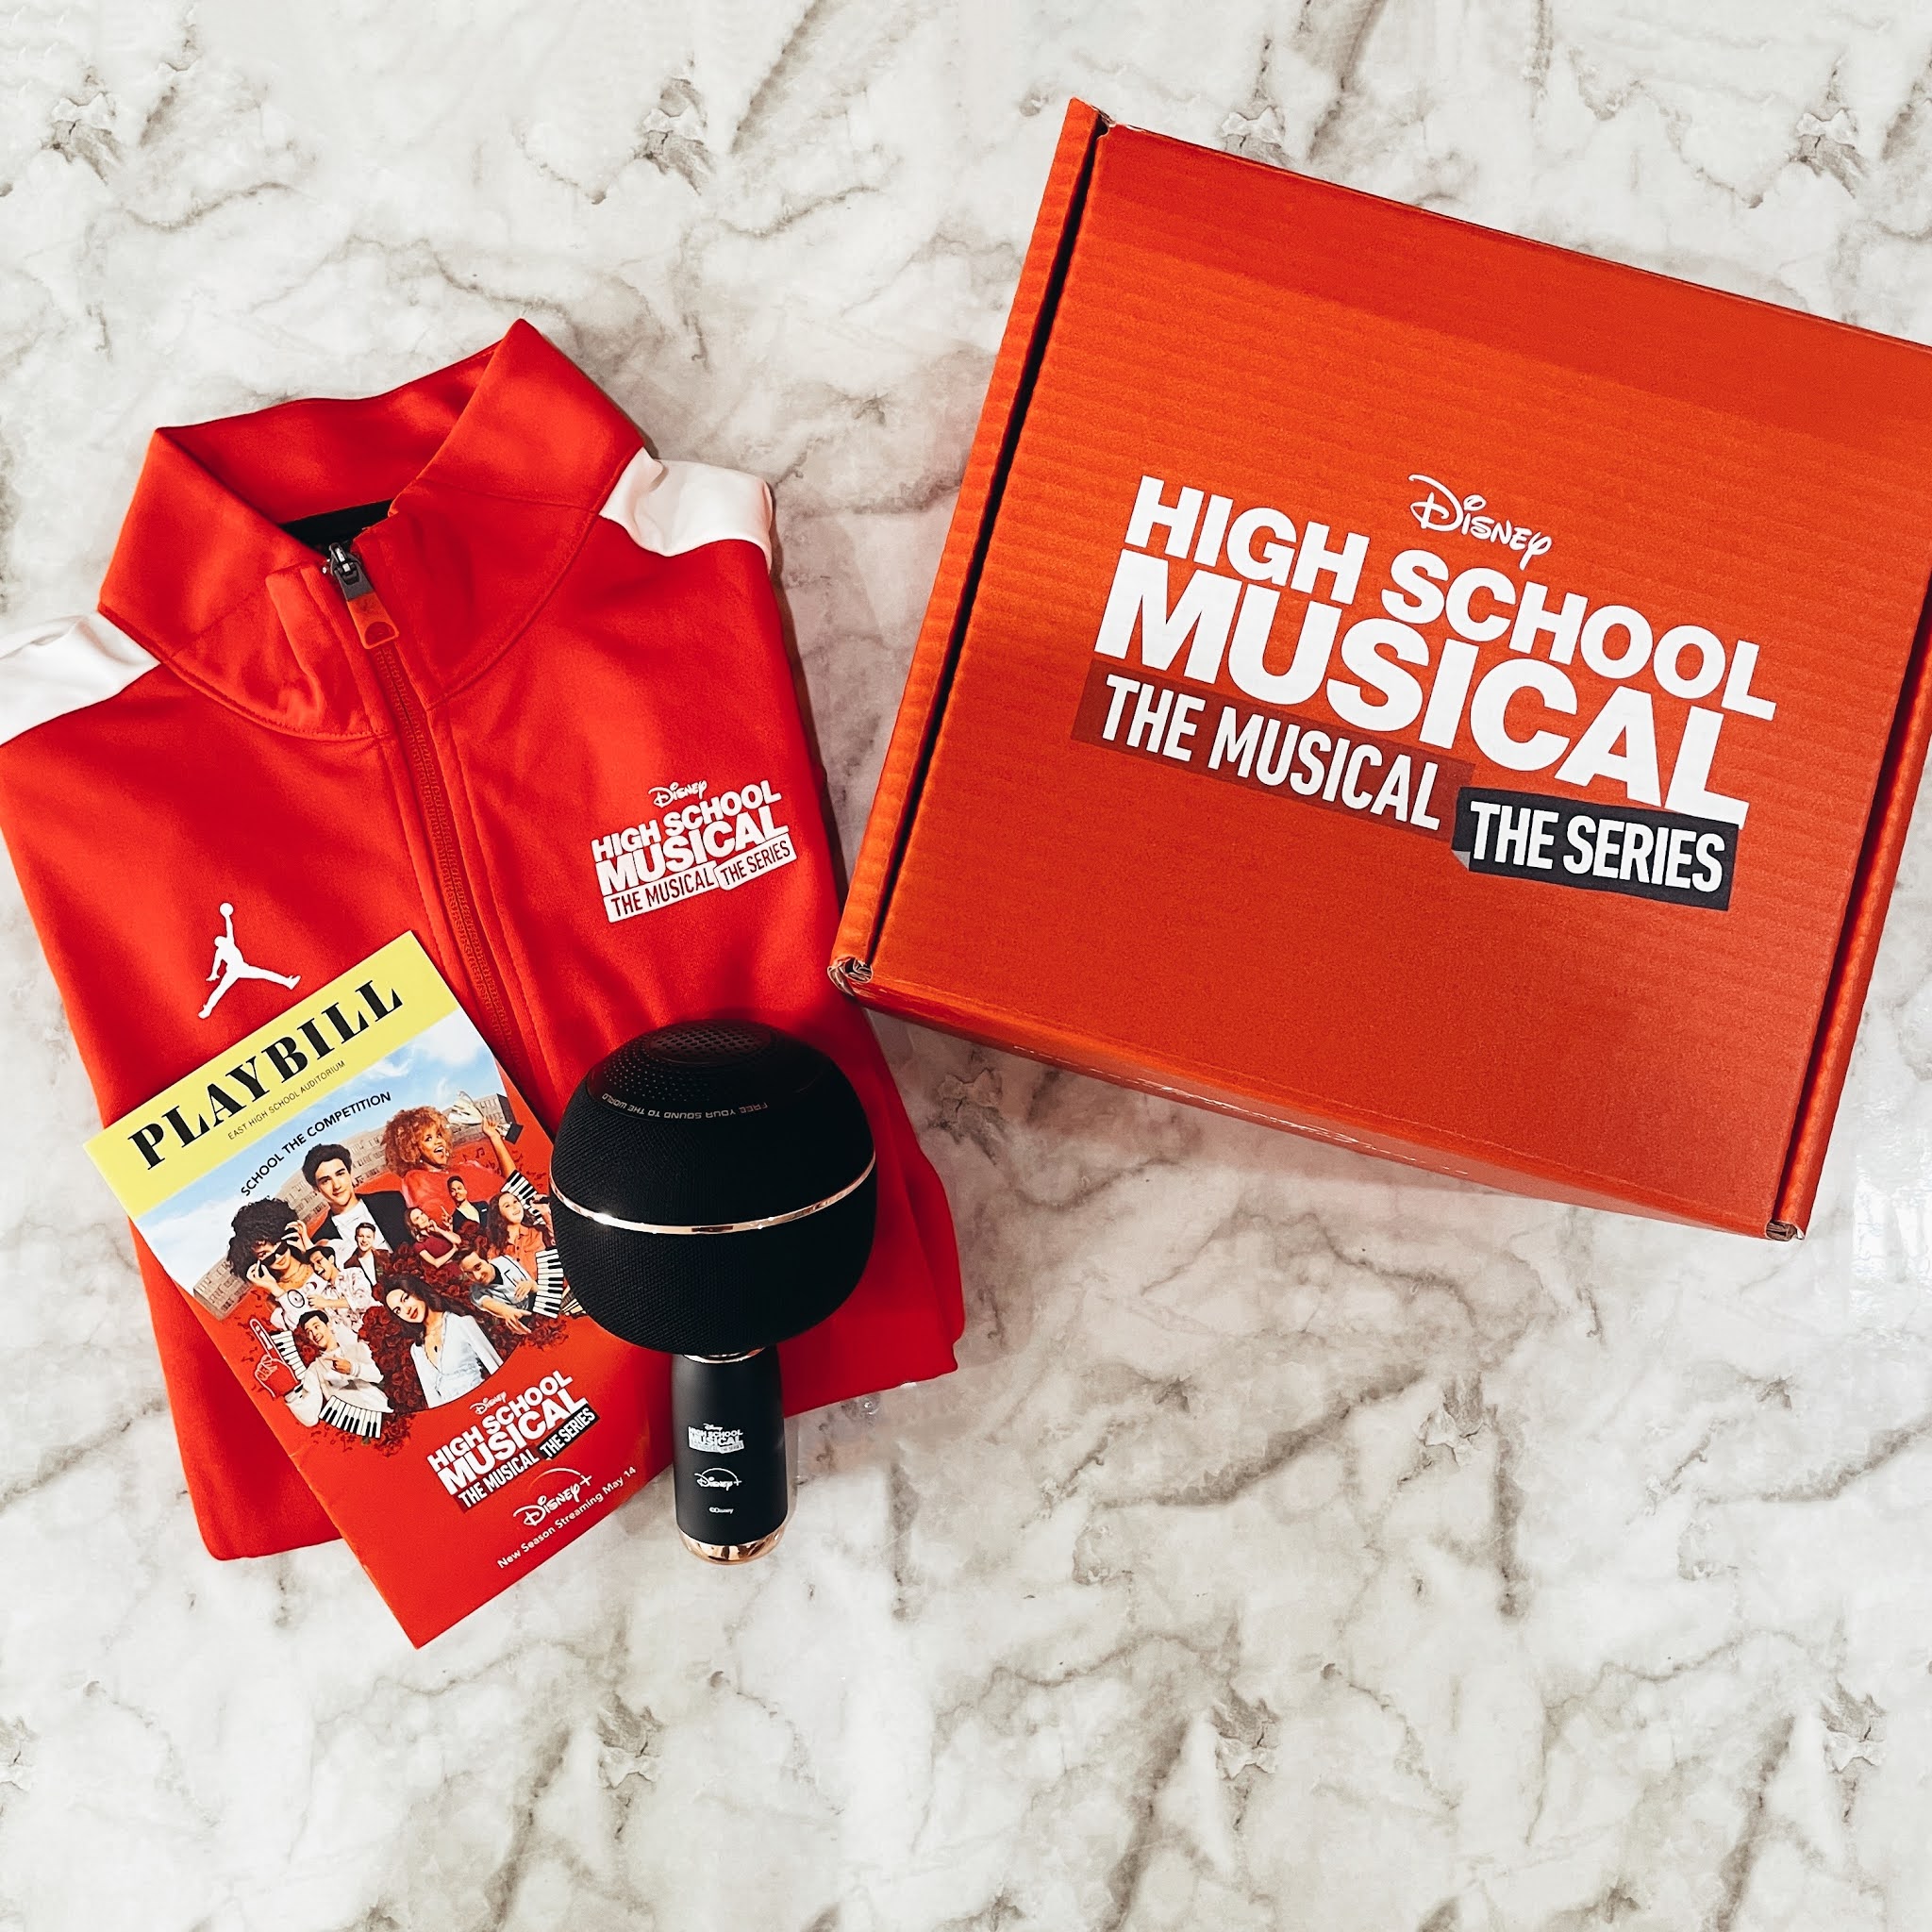 High School Musical: The Musical: Disney+ May premiering THE - PATRICIOS on on Series\' The 14th